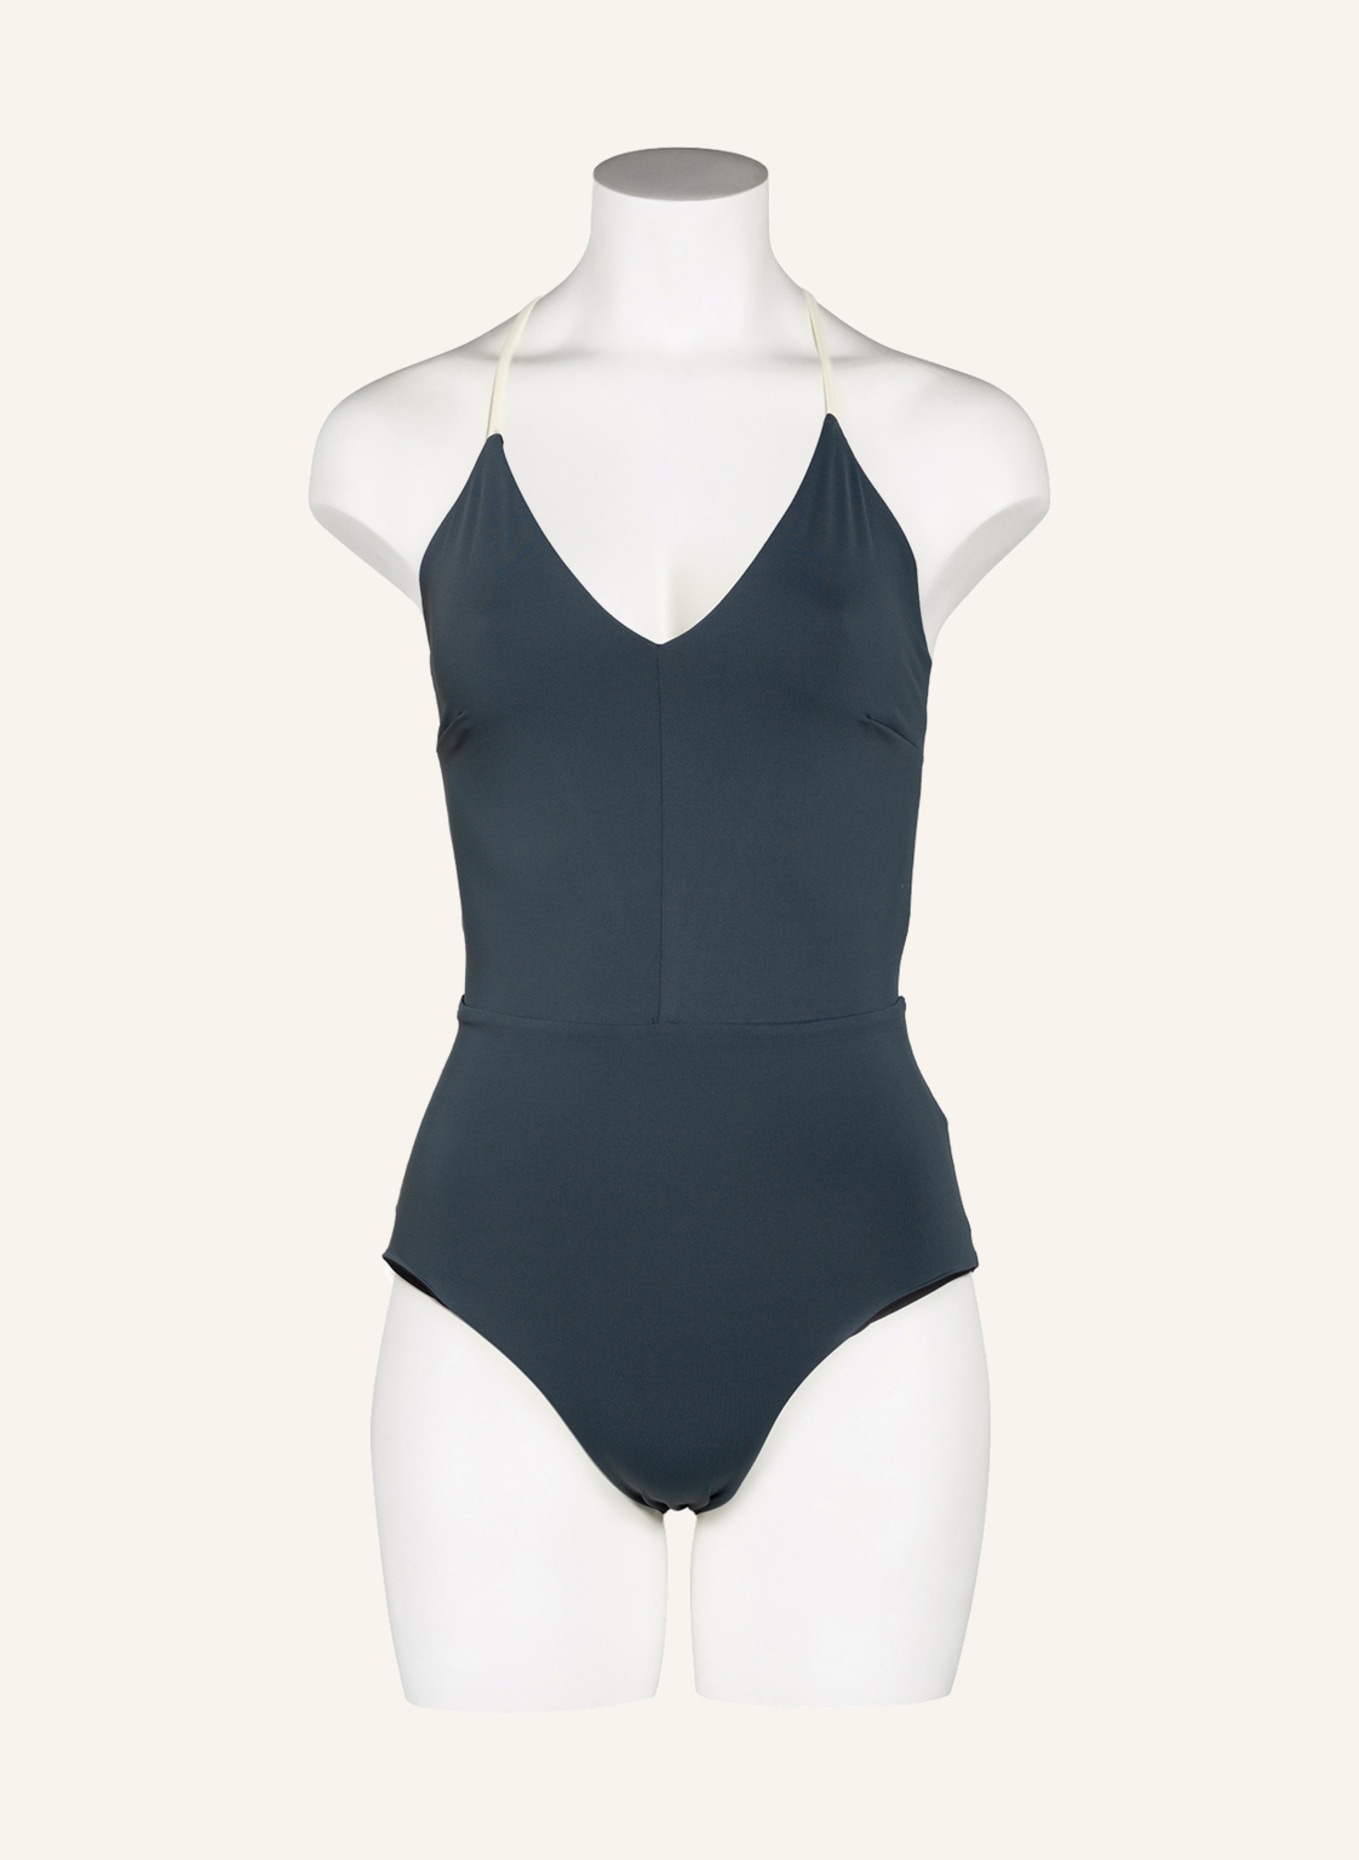 MYMARINI Swimsuit SUMMERSUIT reversible with UV protection 50+, Color: BLACK/ GRAY/ ECRU (Image 3)